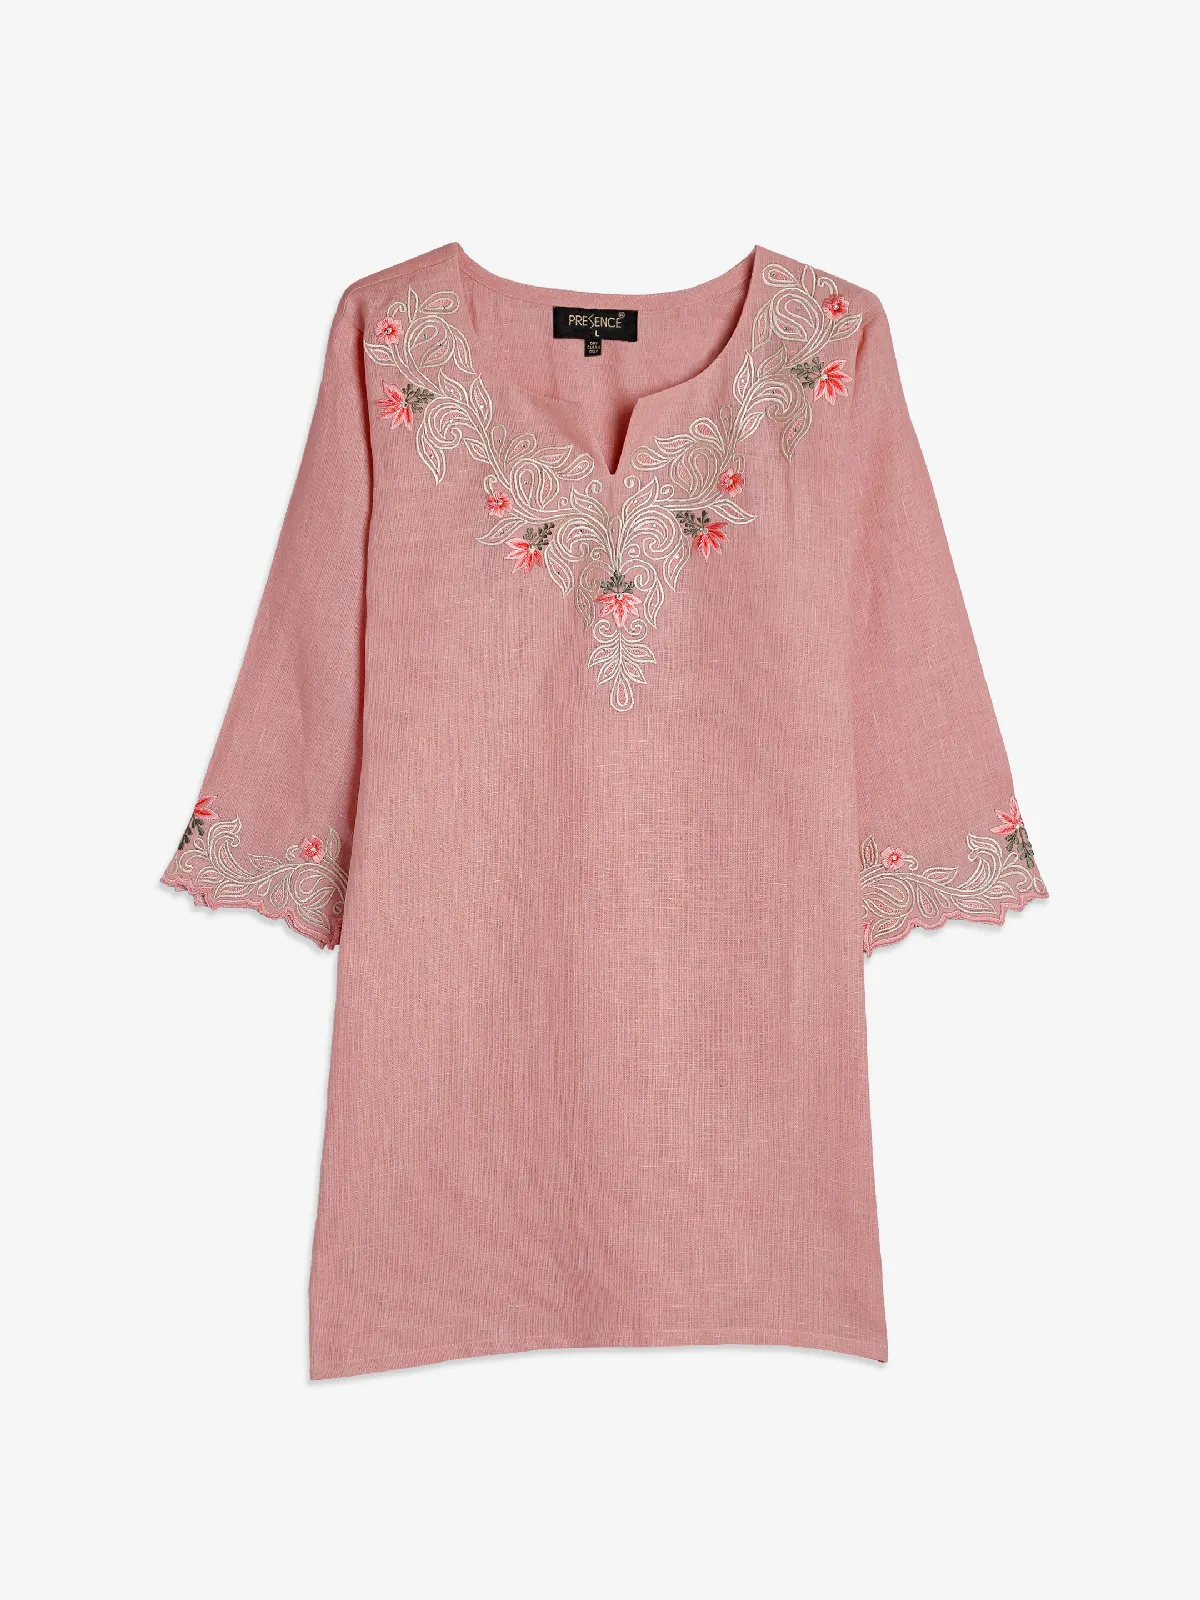 Cotton pink tunic top